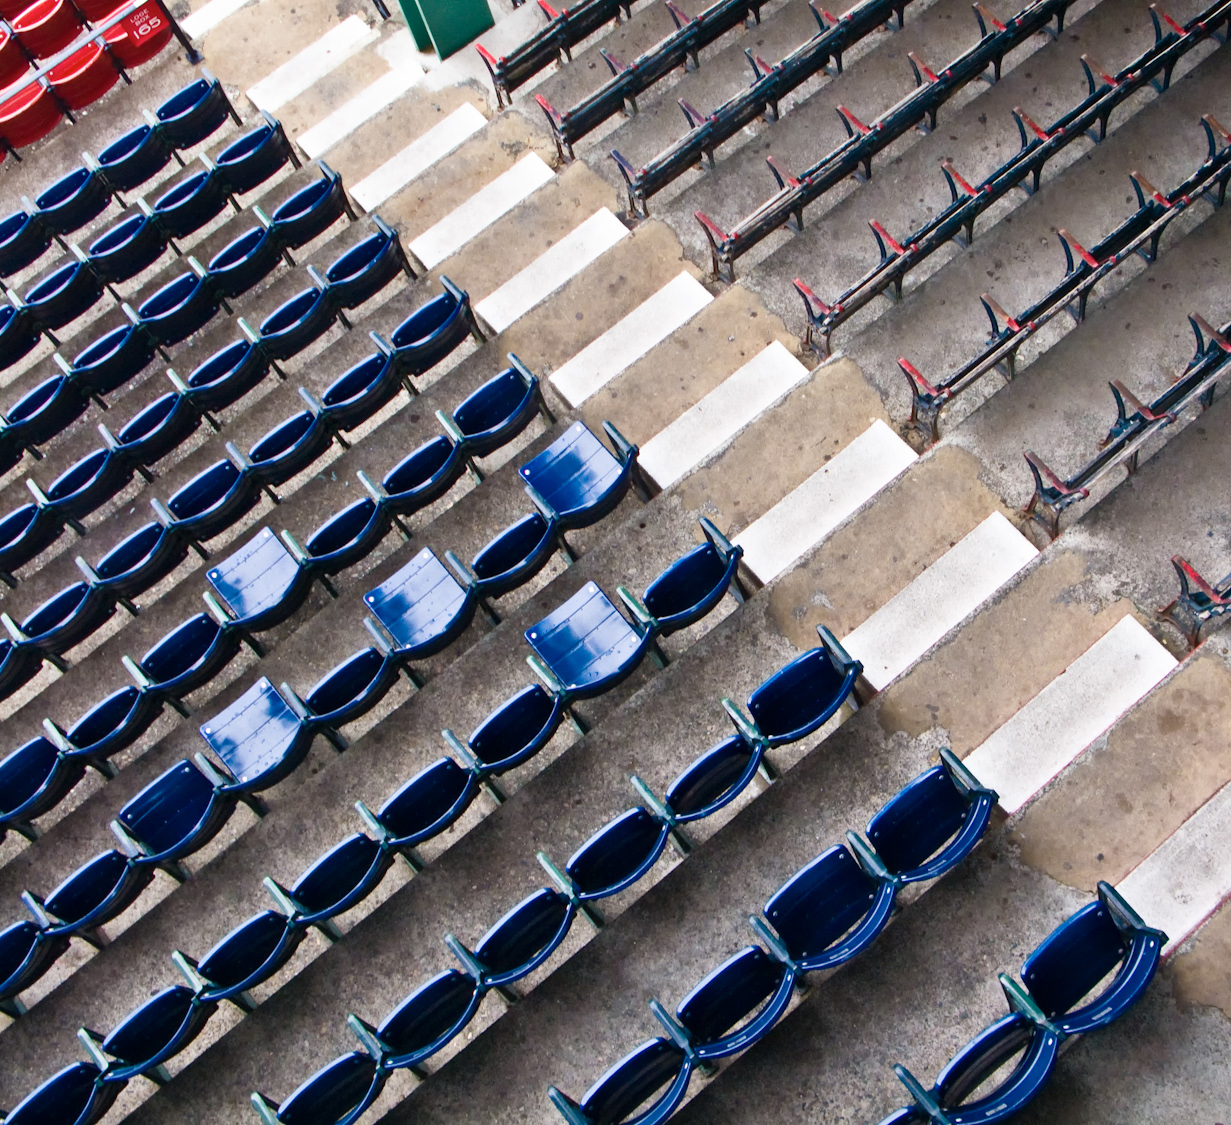 The oldest seats in baseball - Fenway Park